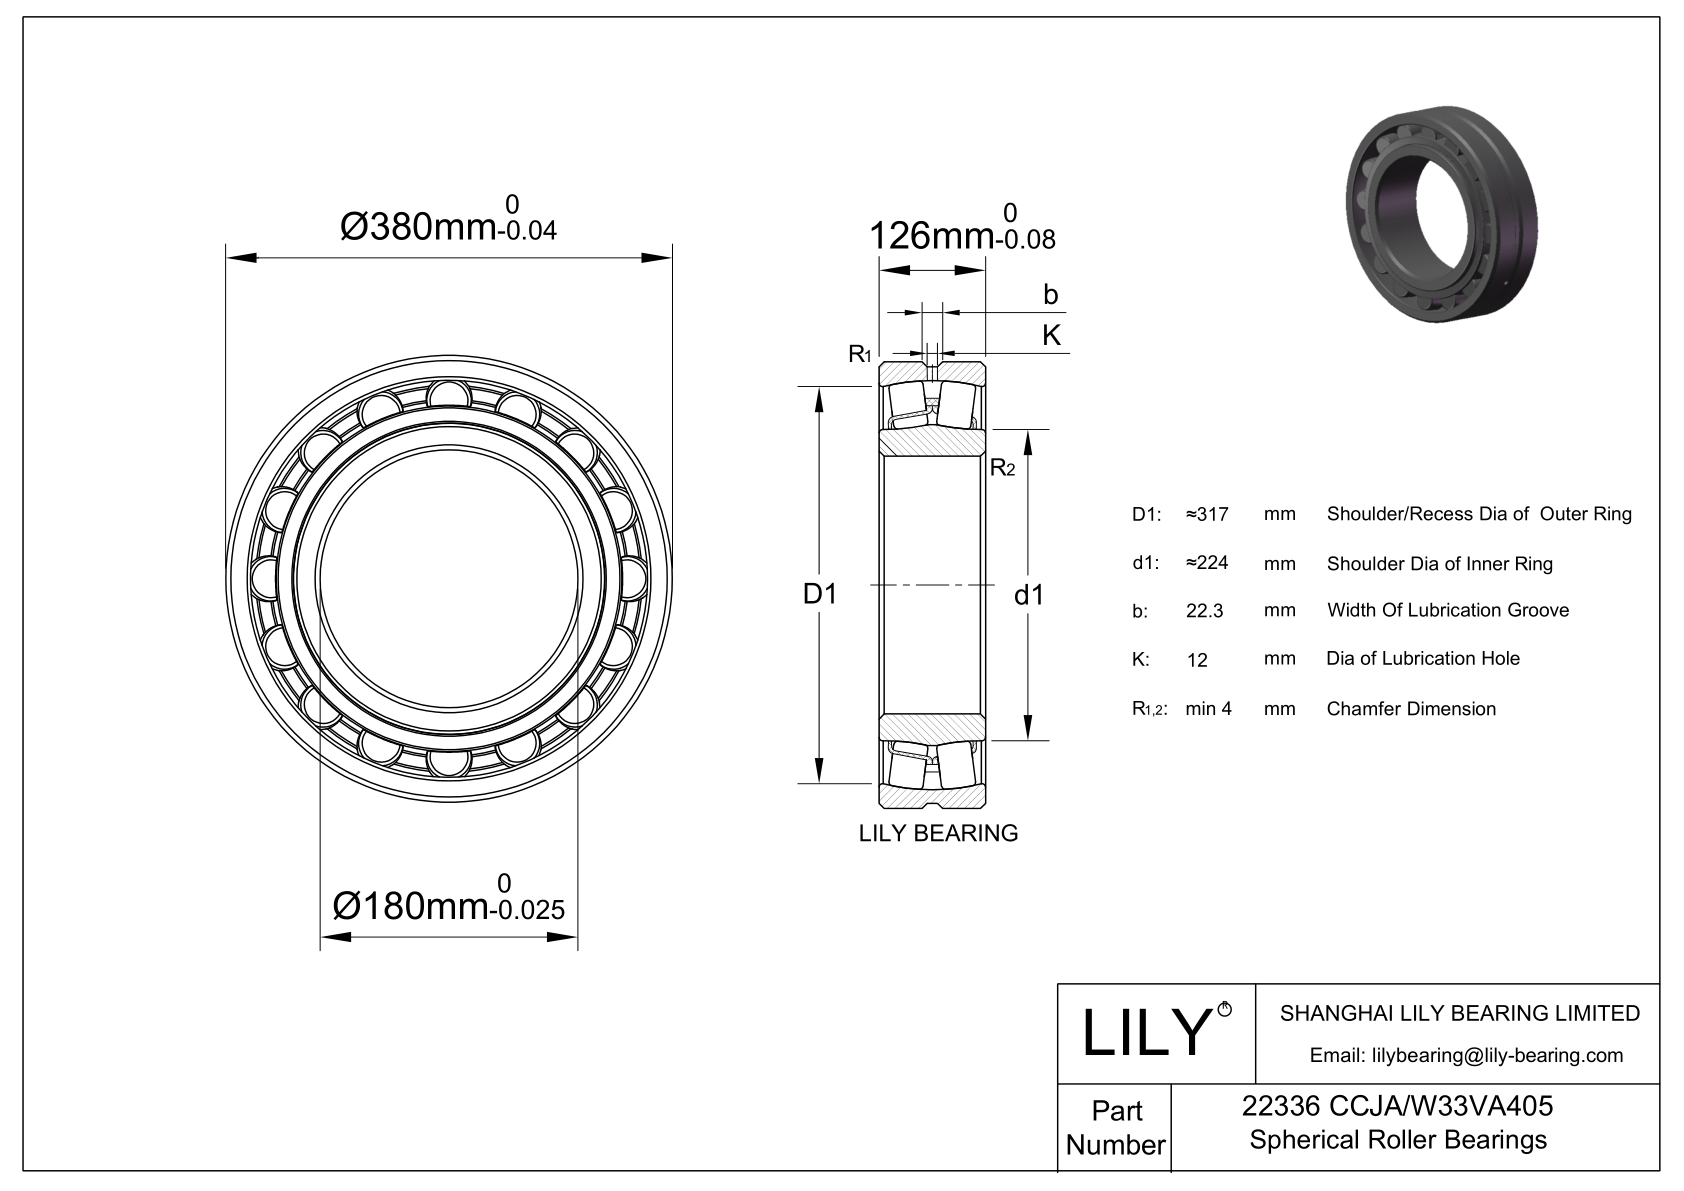 22336 CCJA/W33VA405 Double Row Spherical Roller Bearing cad drawing